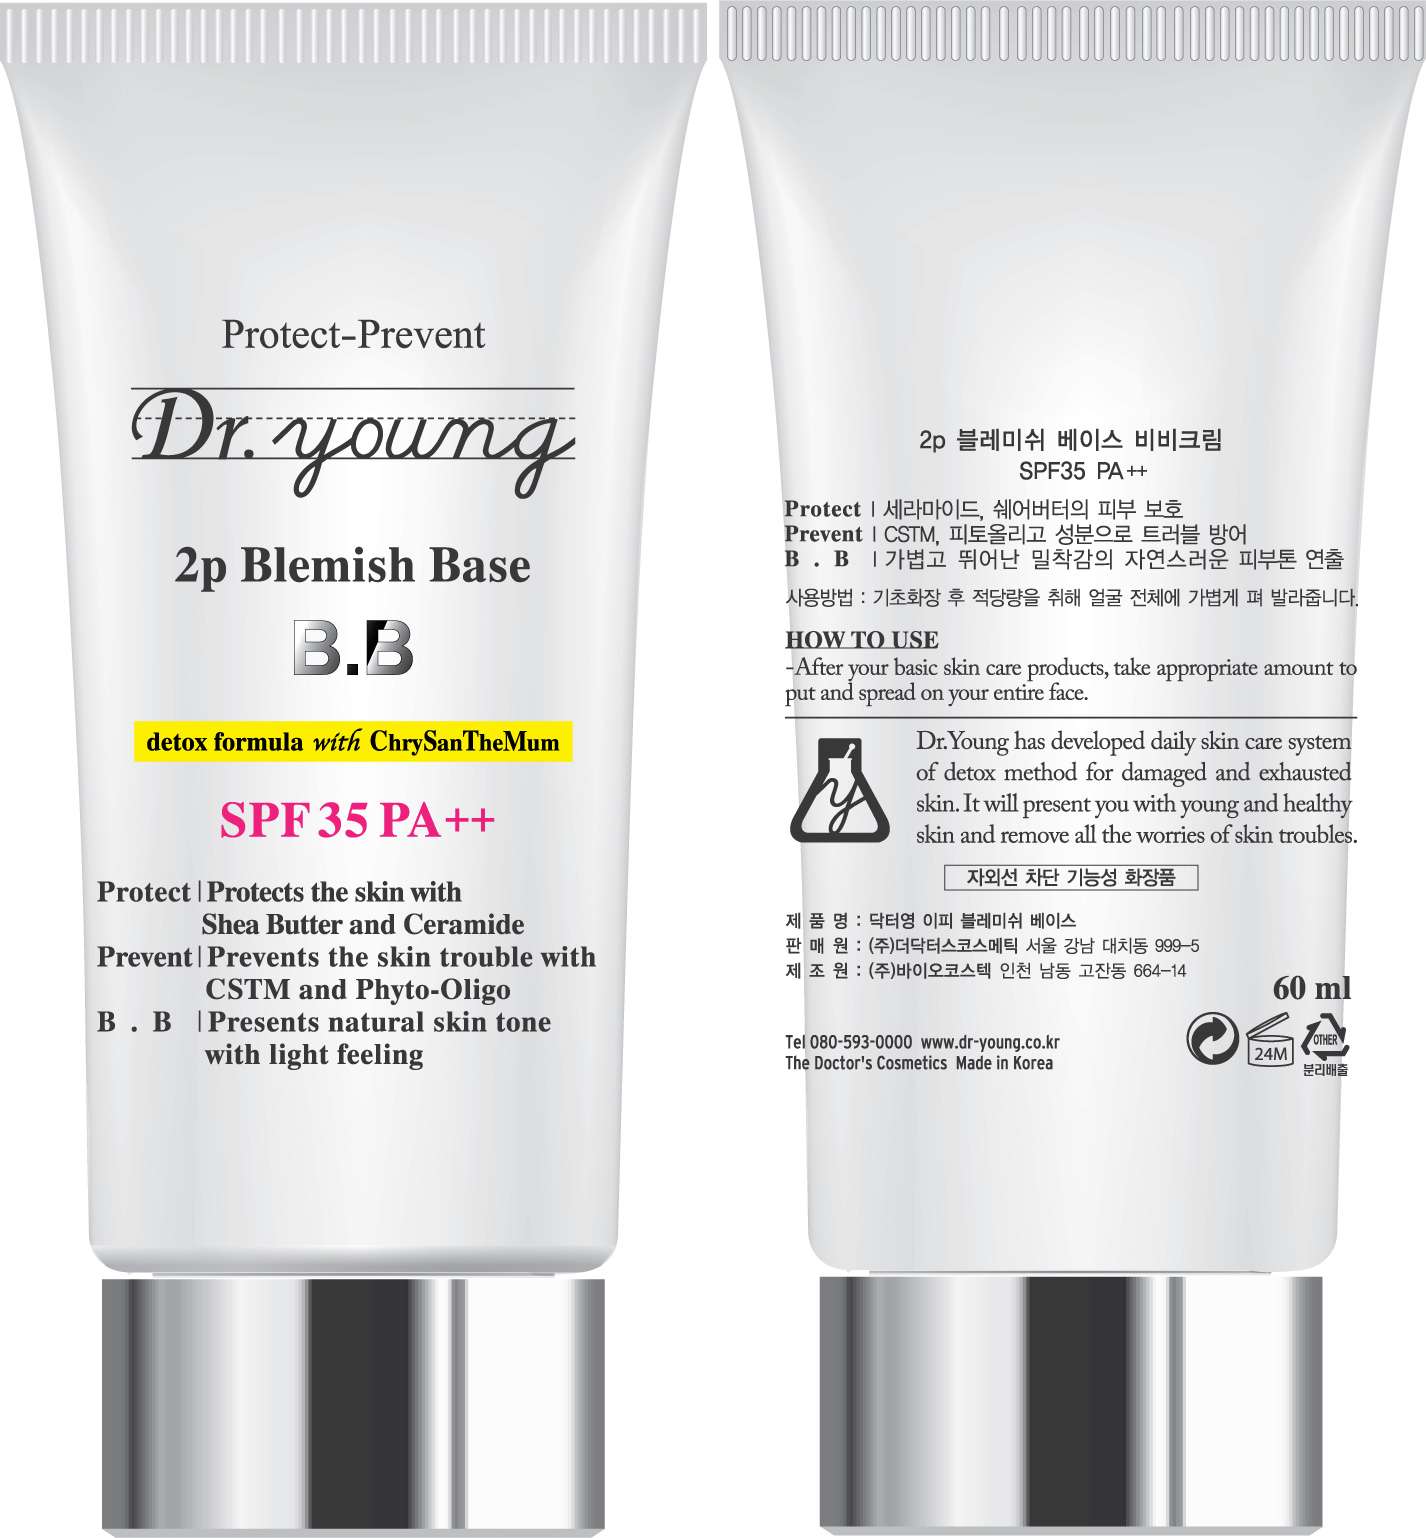 Dr Young 2p Blemish Base SPF35 PA